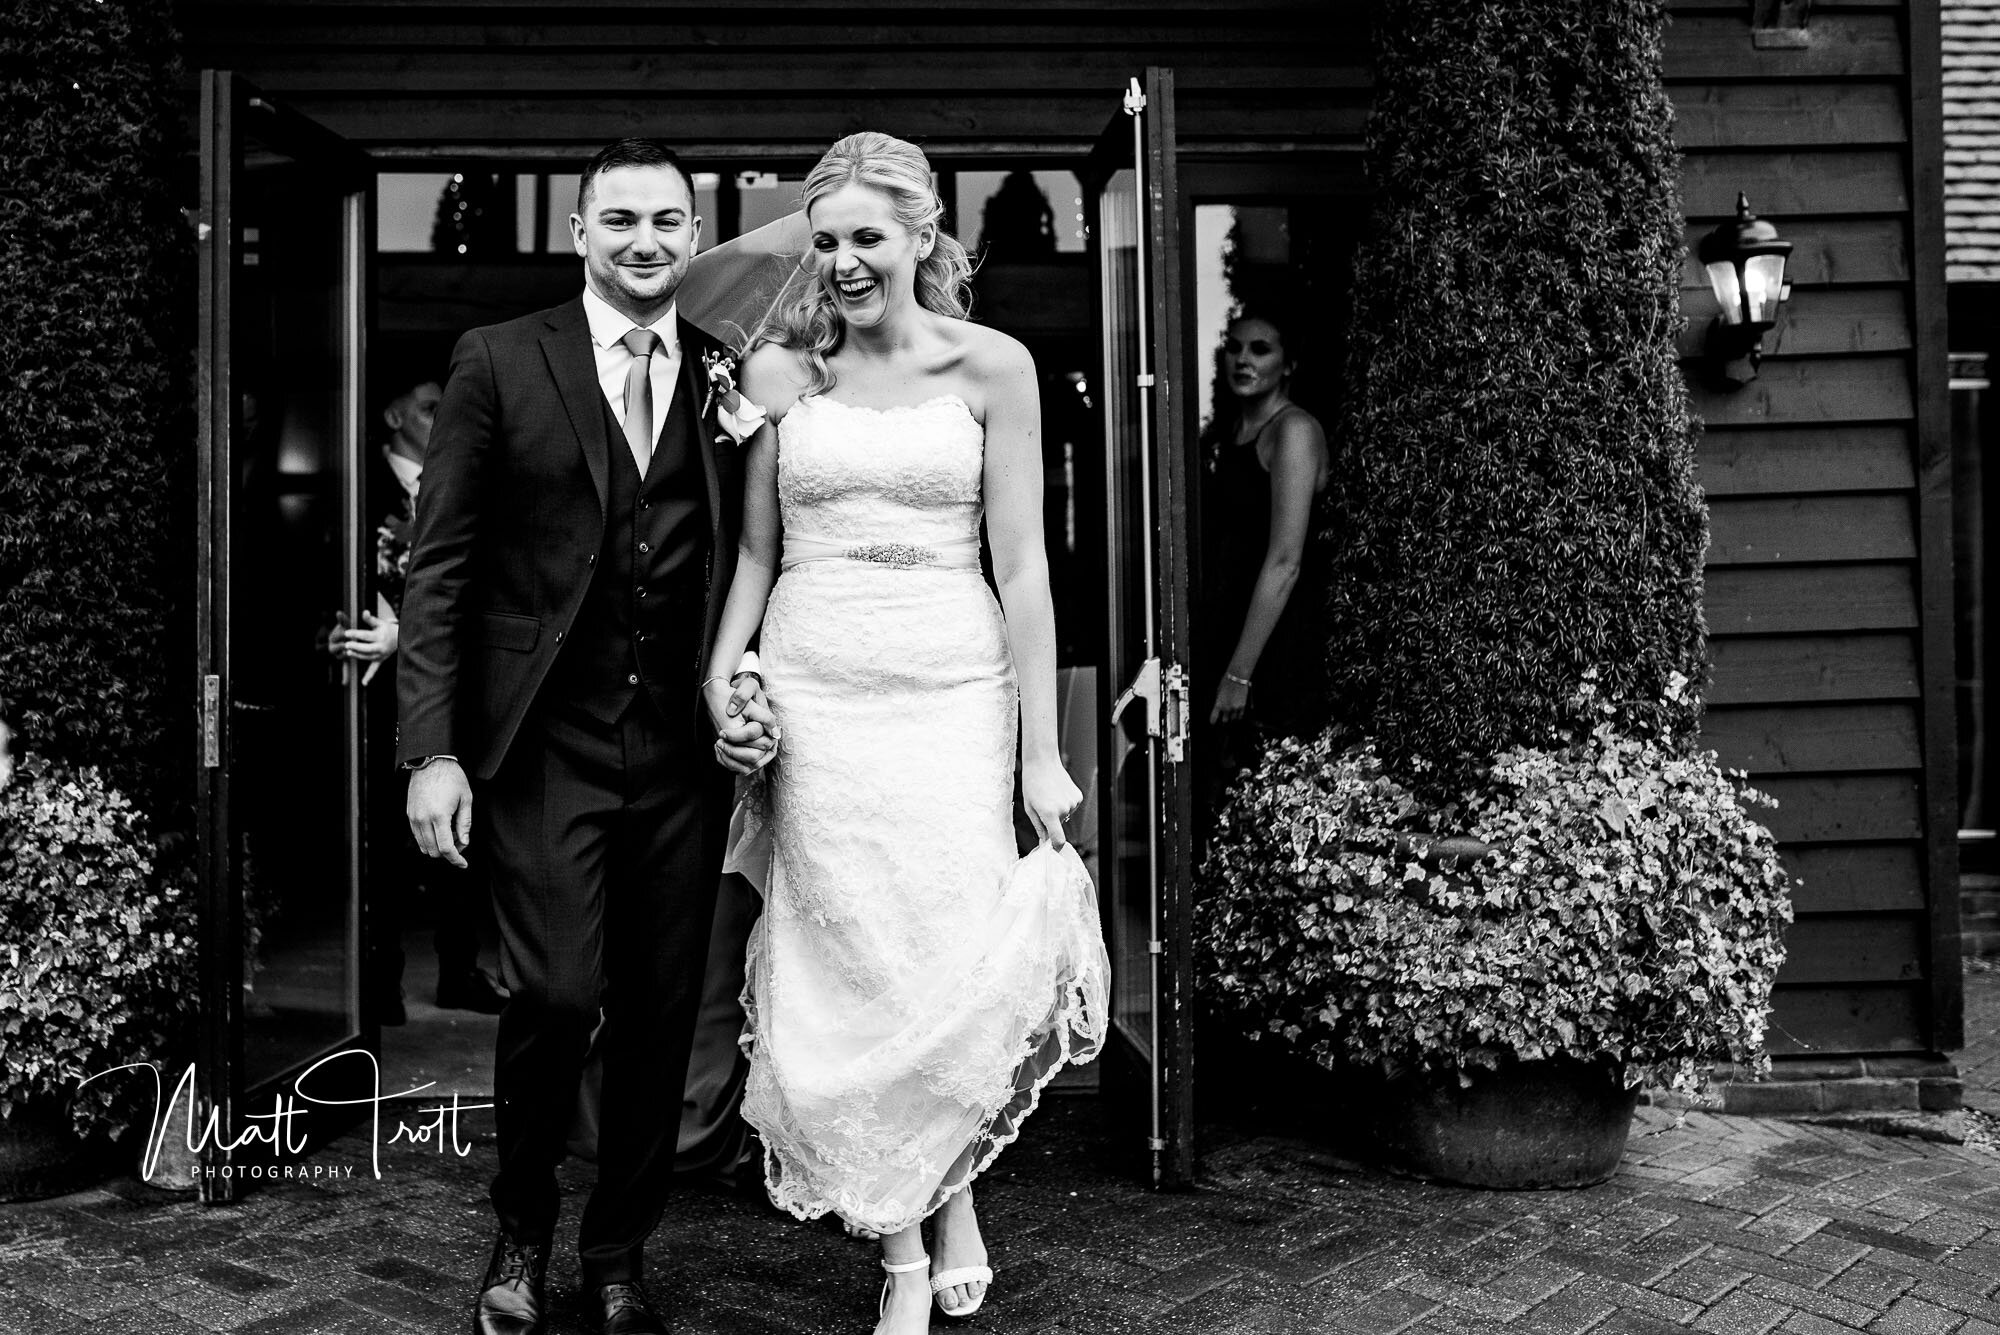 Bride and groom laughing as they enter the wind and rain at the old kent barn